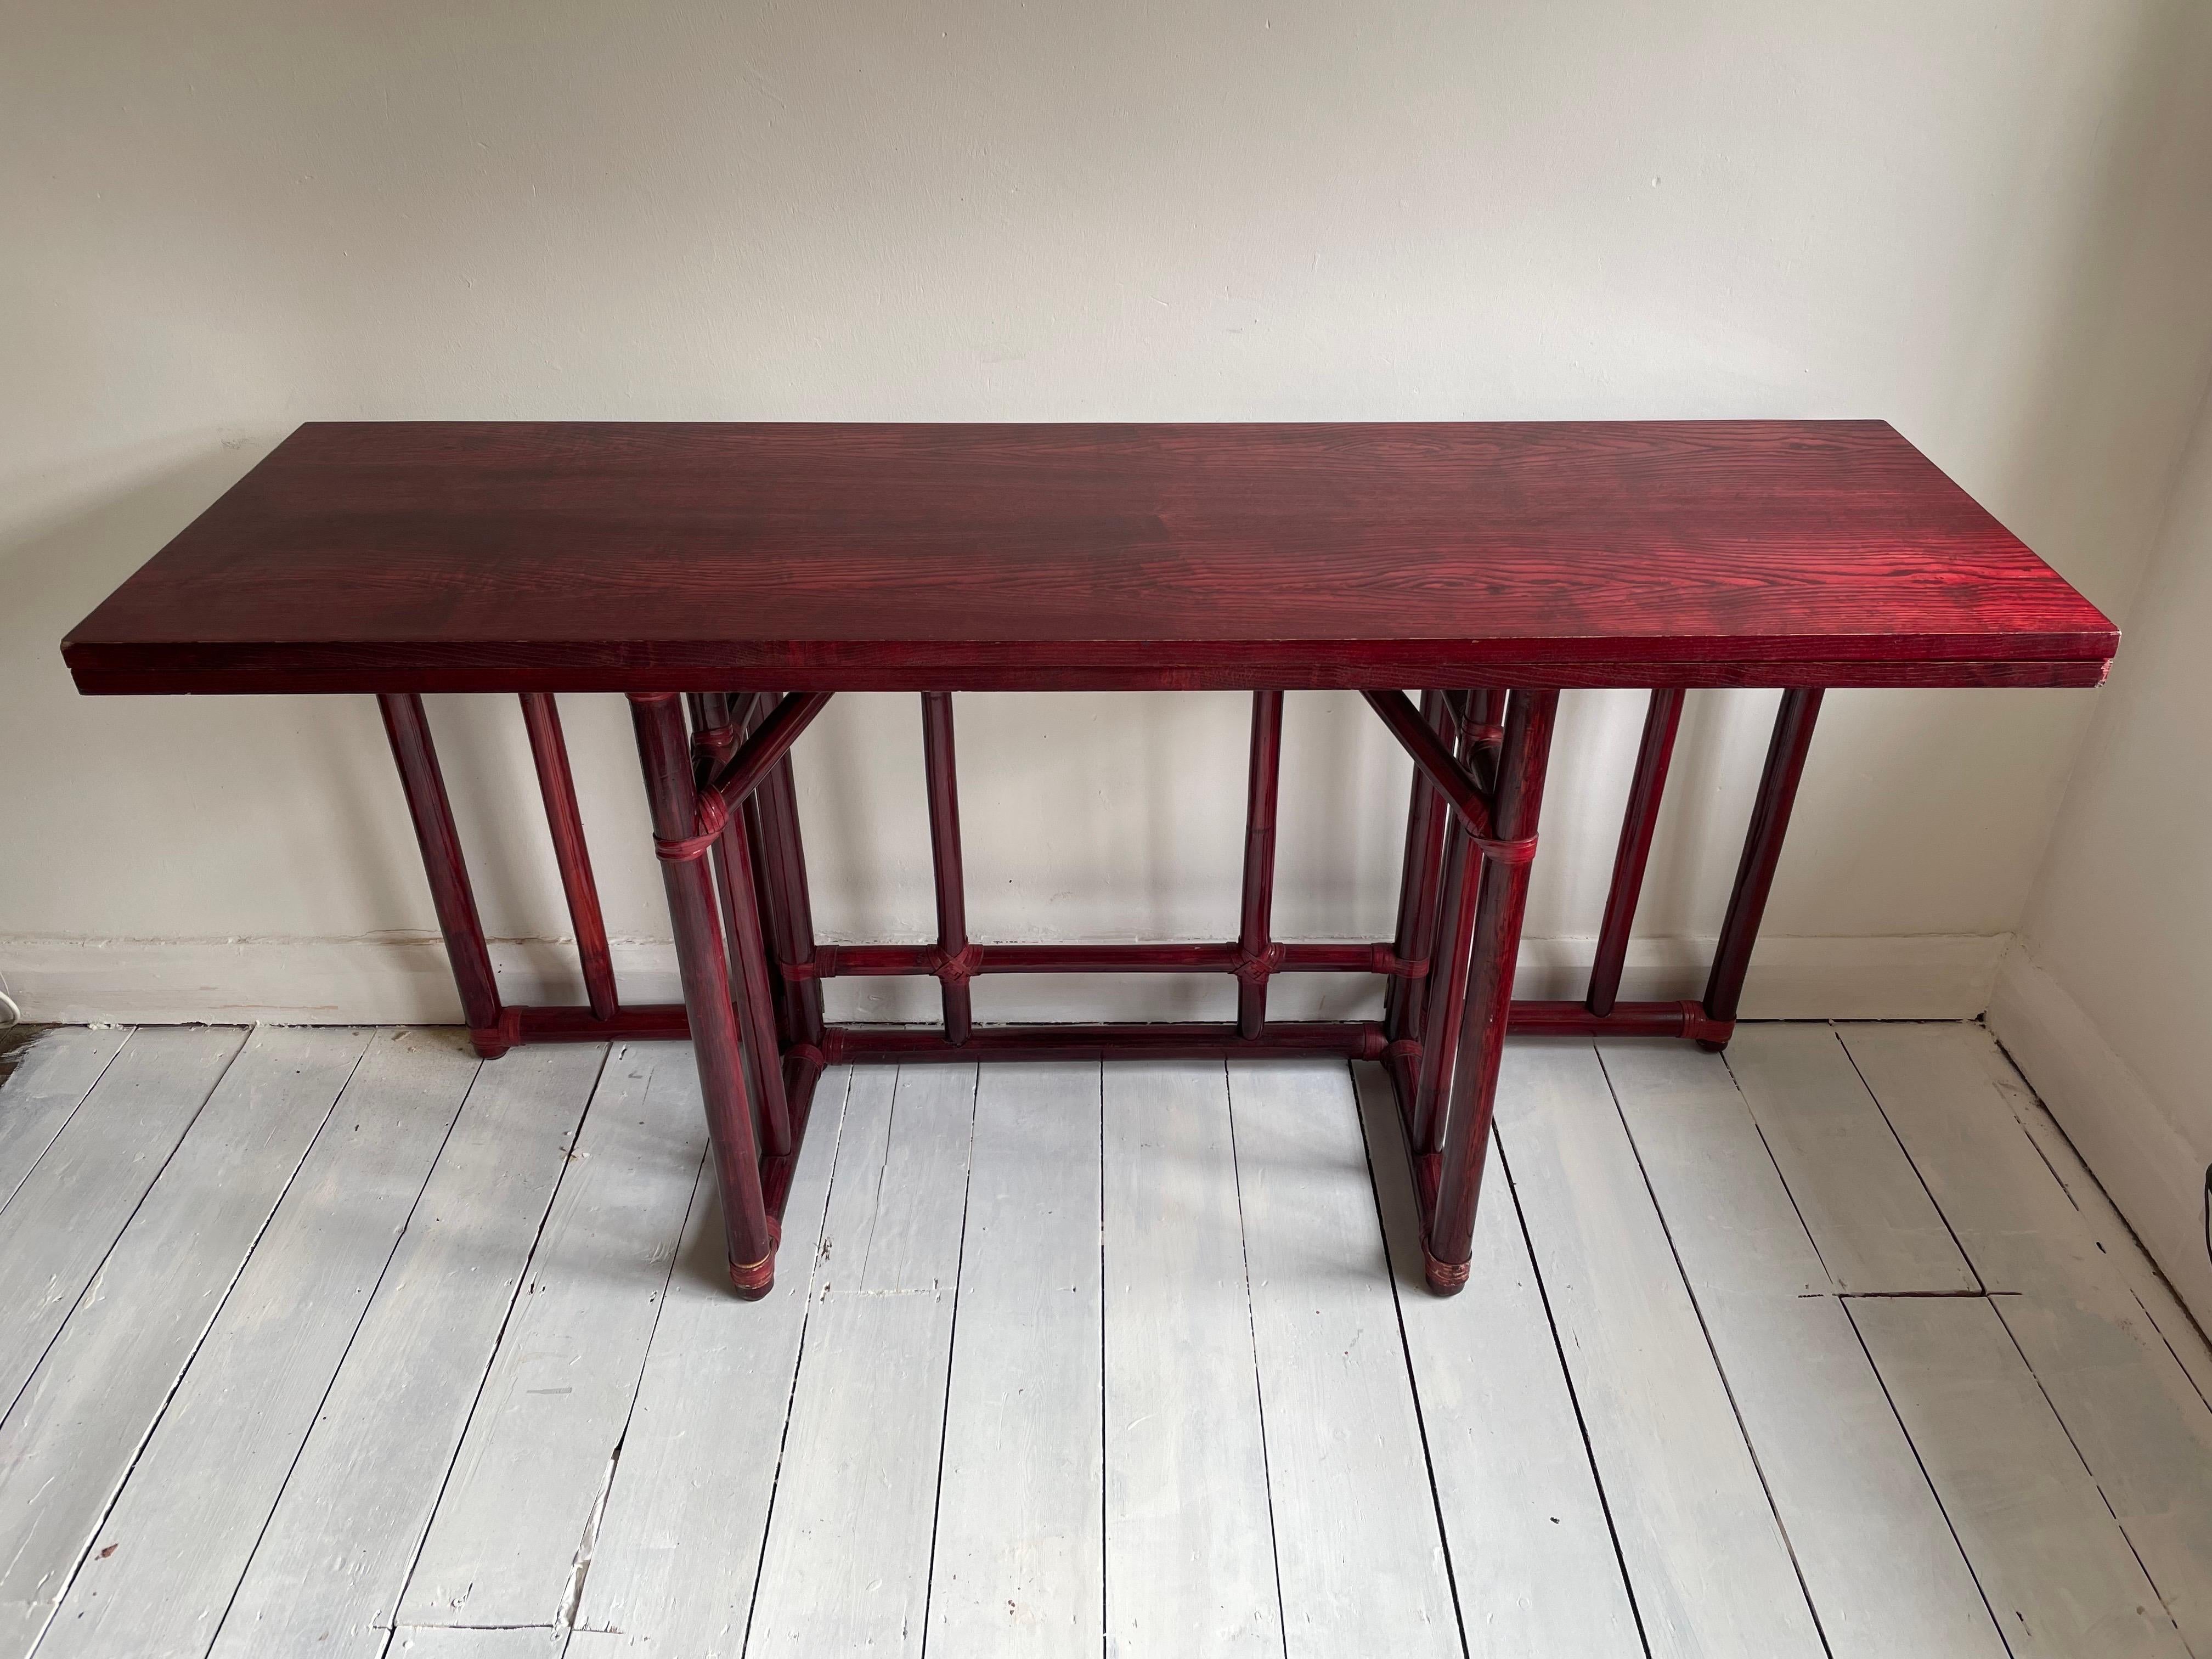 Versatile and handsome flip top-server or console table that can be extended for use as a dining table. Produced by Maugrion from lacquered rich deep rosewood colour oak with a bamboo rattan base reinforced with their signature leather rawhide lace